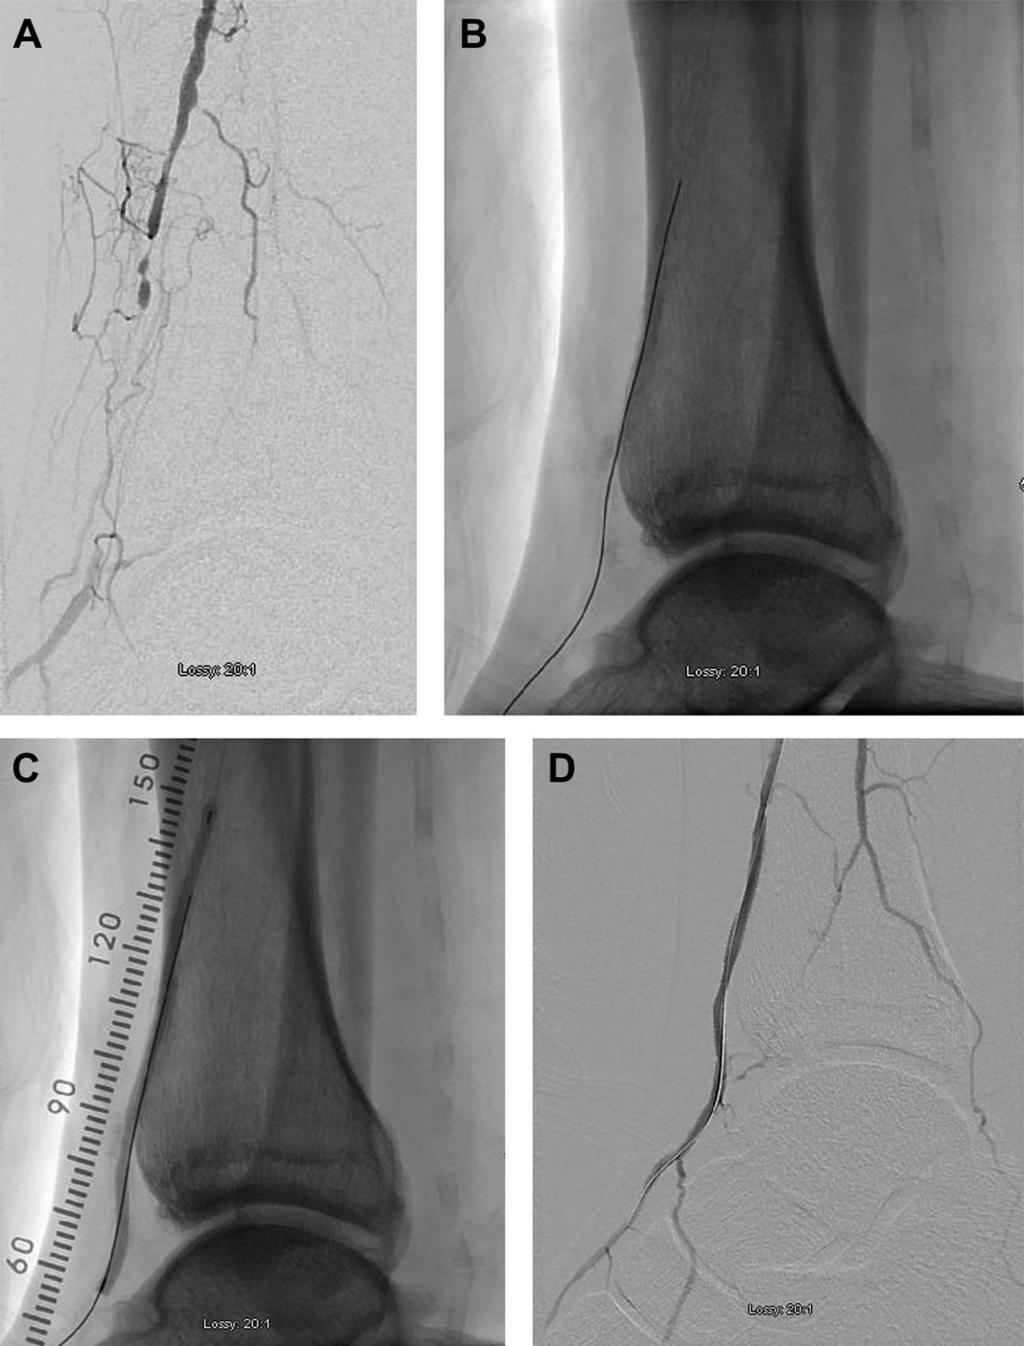 B, The wire passage is accomplished through the needle and into the true lumen. In this case, the re-entry site into the true lumen is proximal to a calcified above-the-knee popliteal artery stenosis.